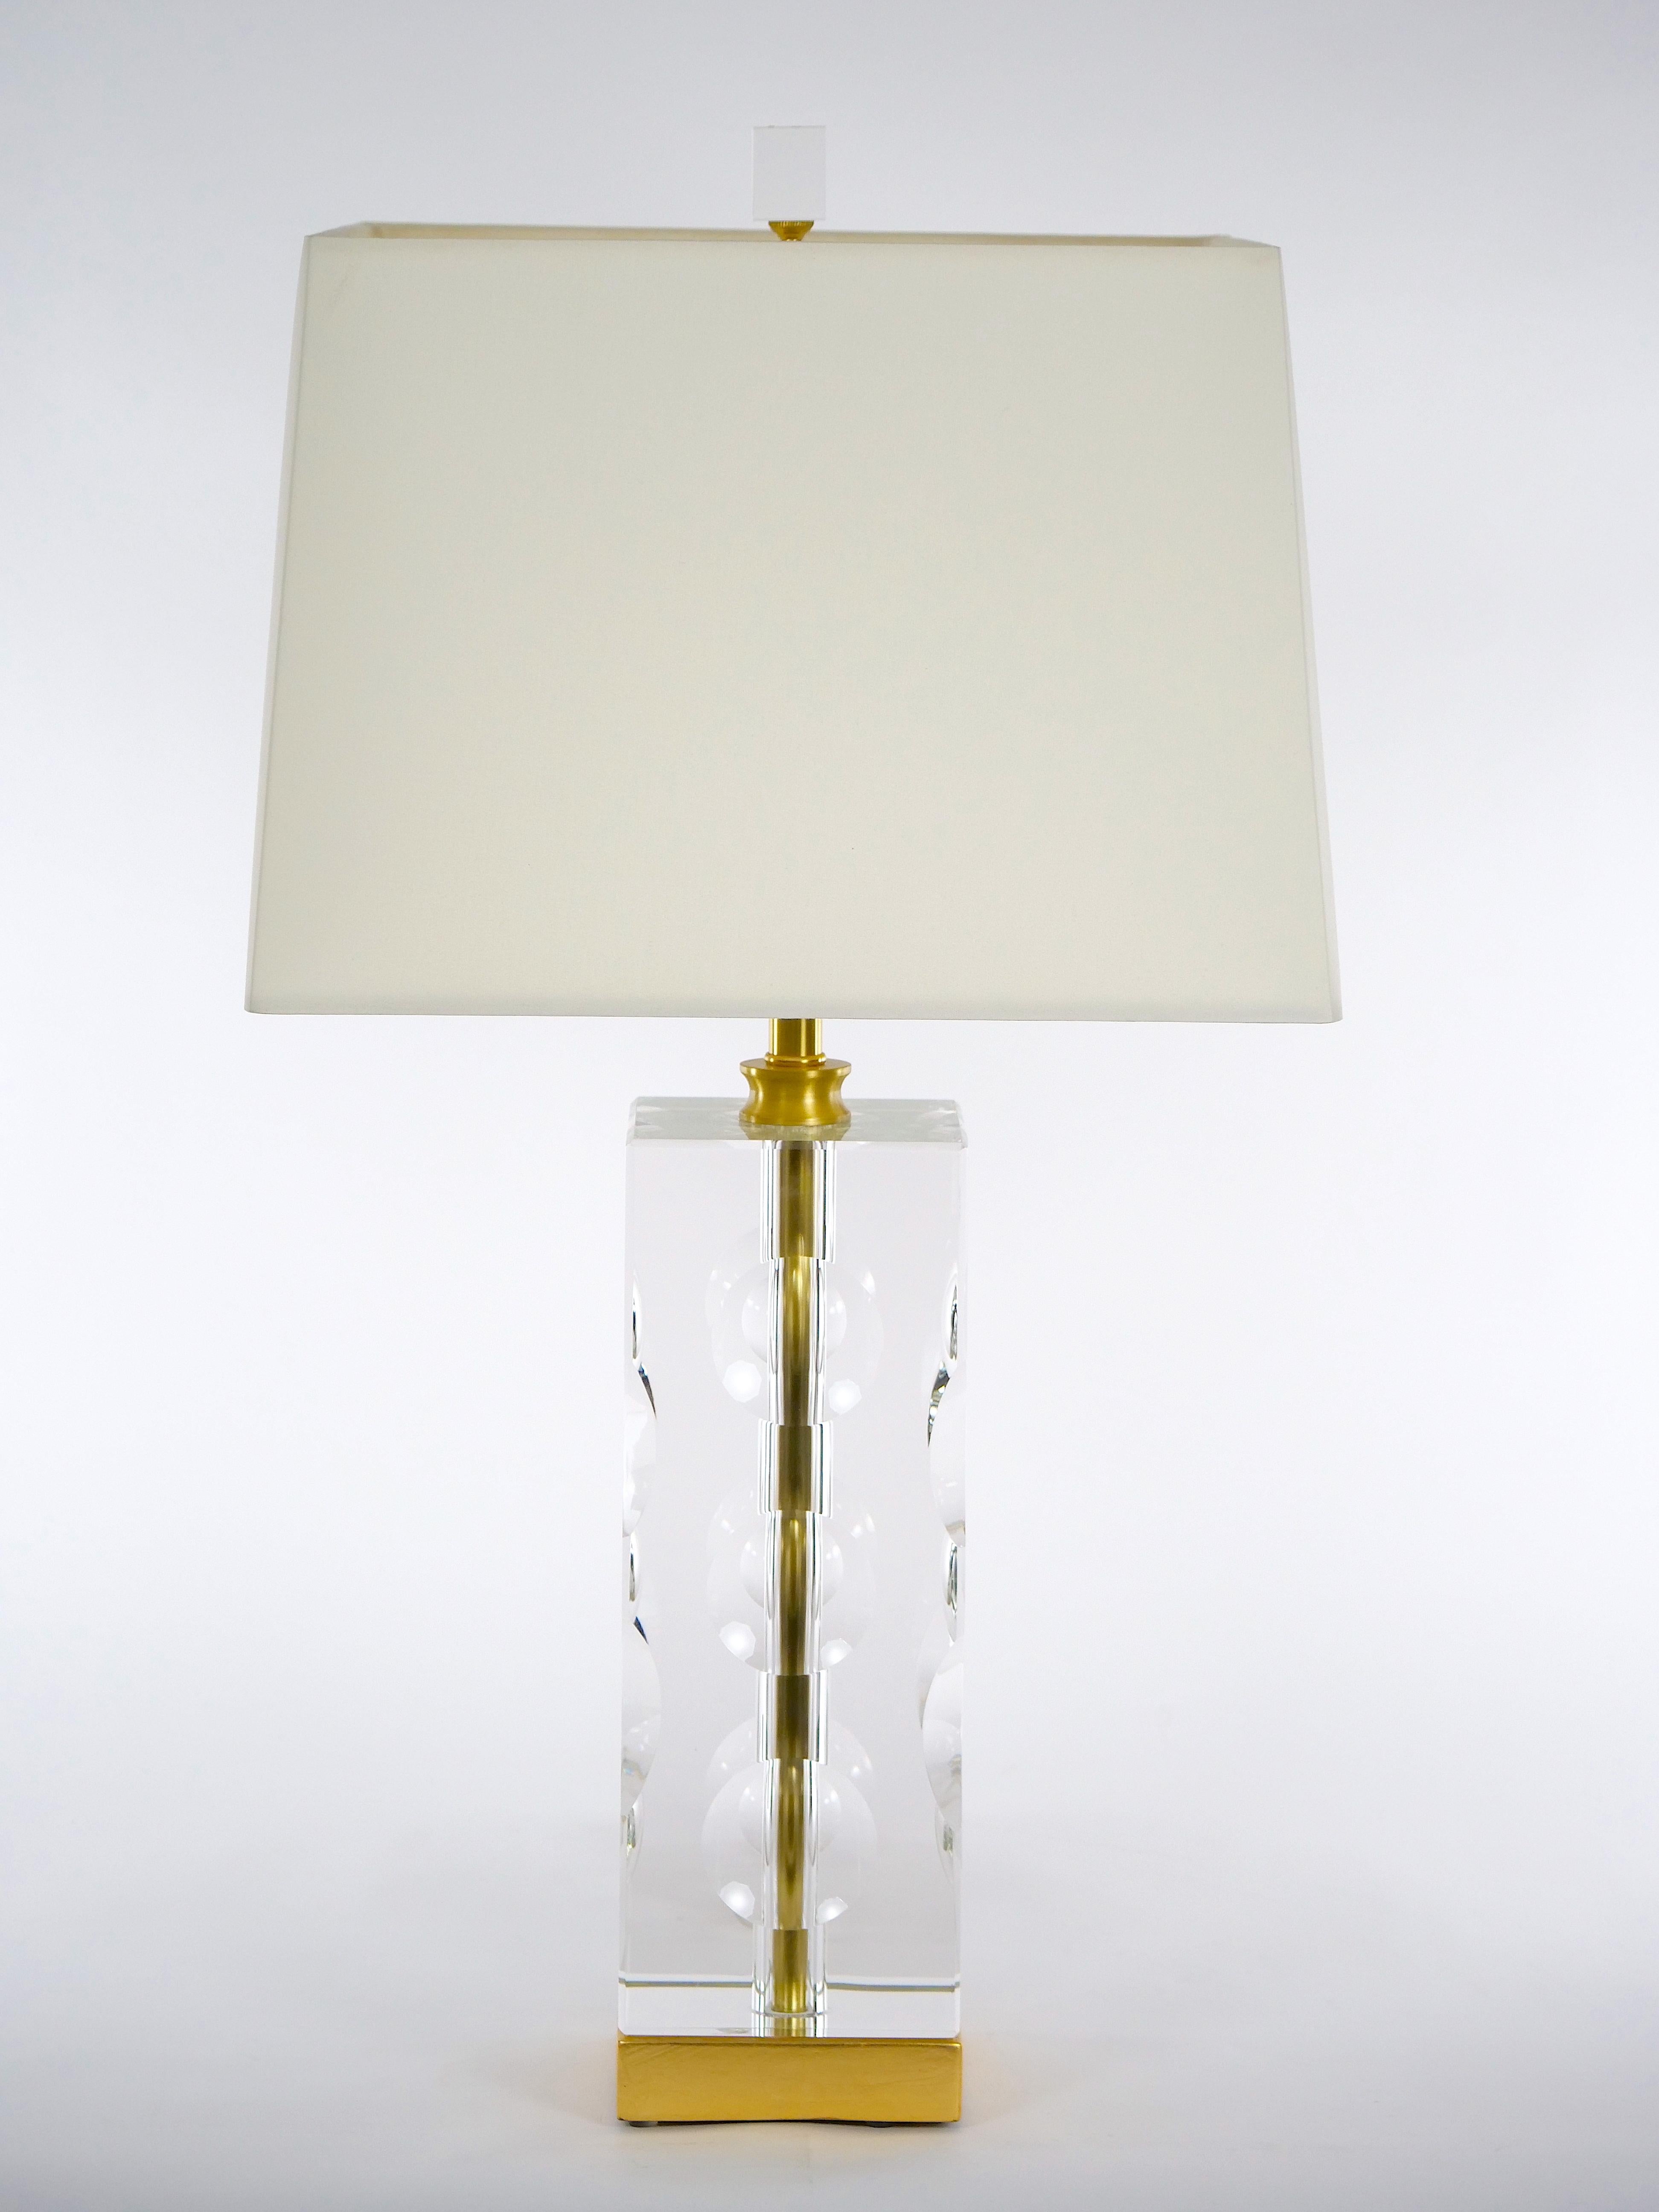 Hand-Crafted Heavy Cut Glass Italian Art Deco Style Pair Table Lamp For Sale